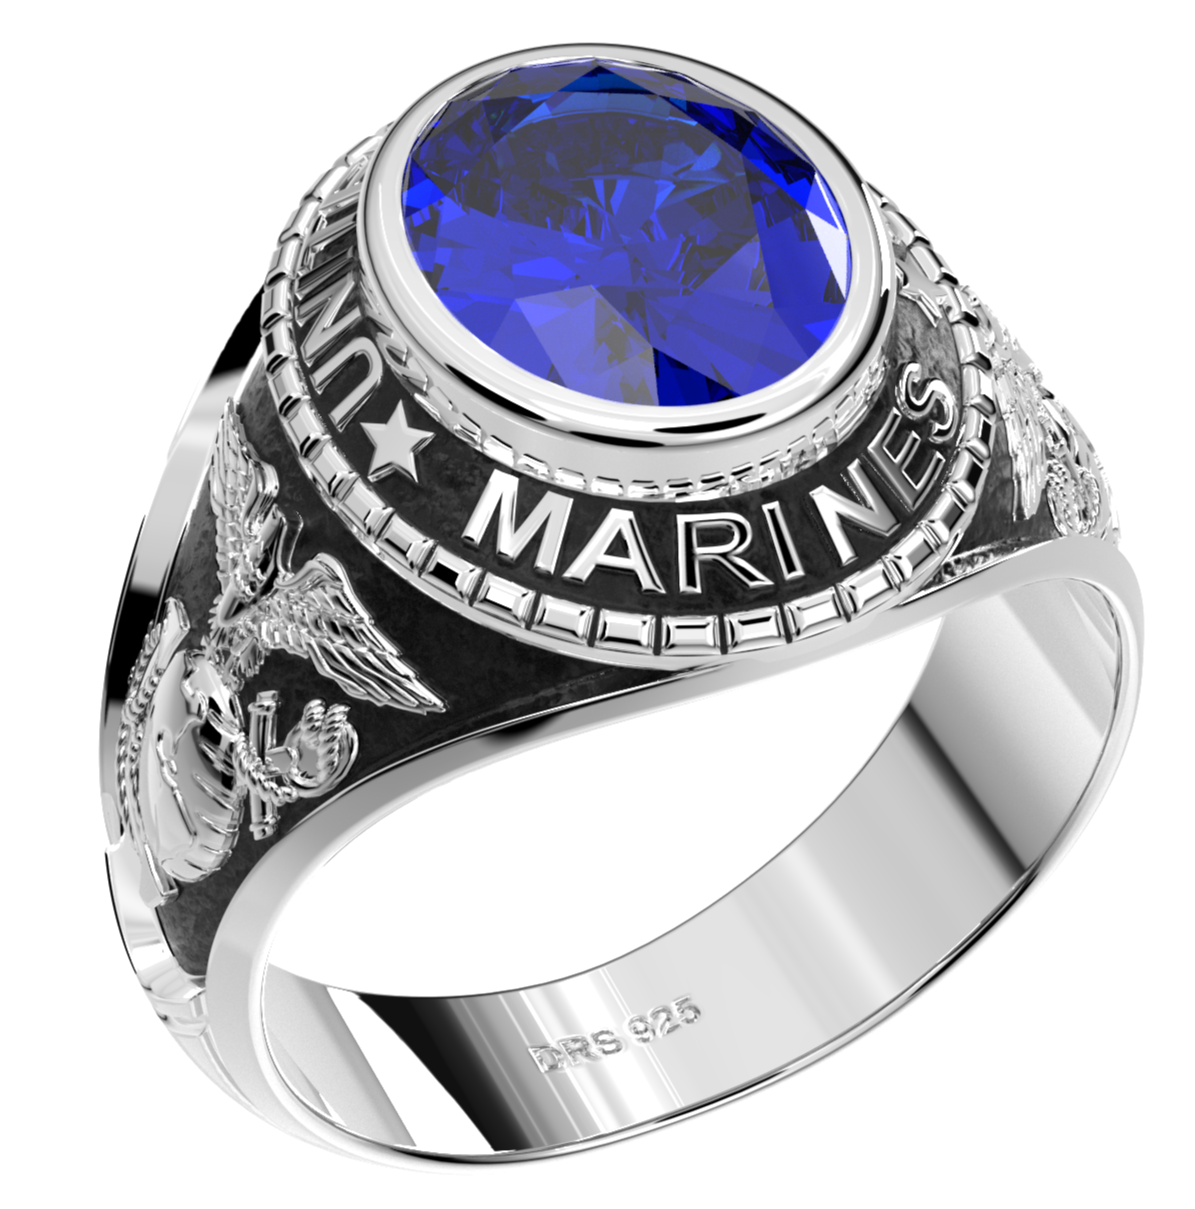 Customizable Men's Antiqued 925 Sterling Silver US Marine Corps Military Solid Back Ring